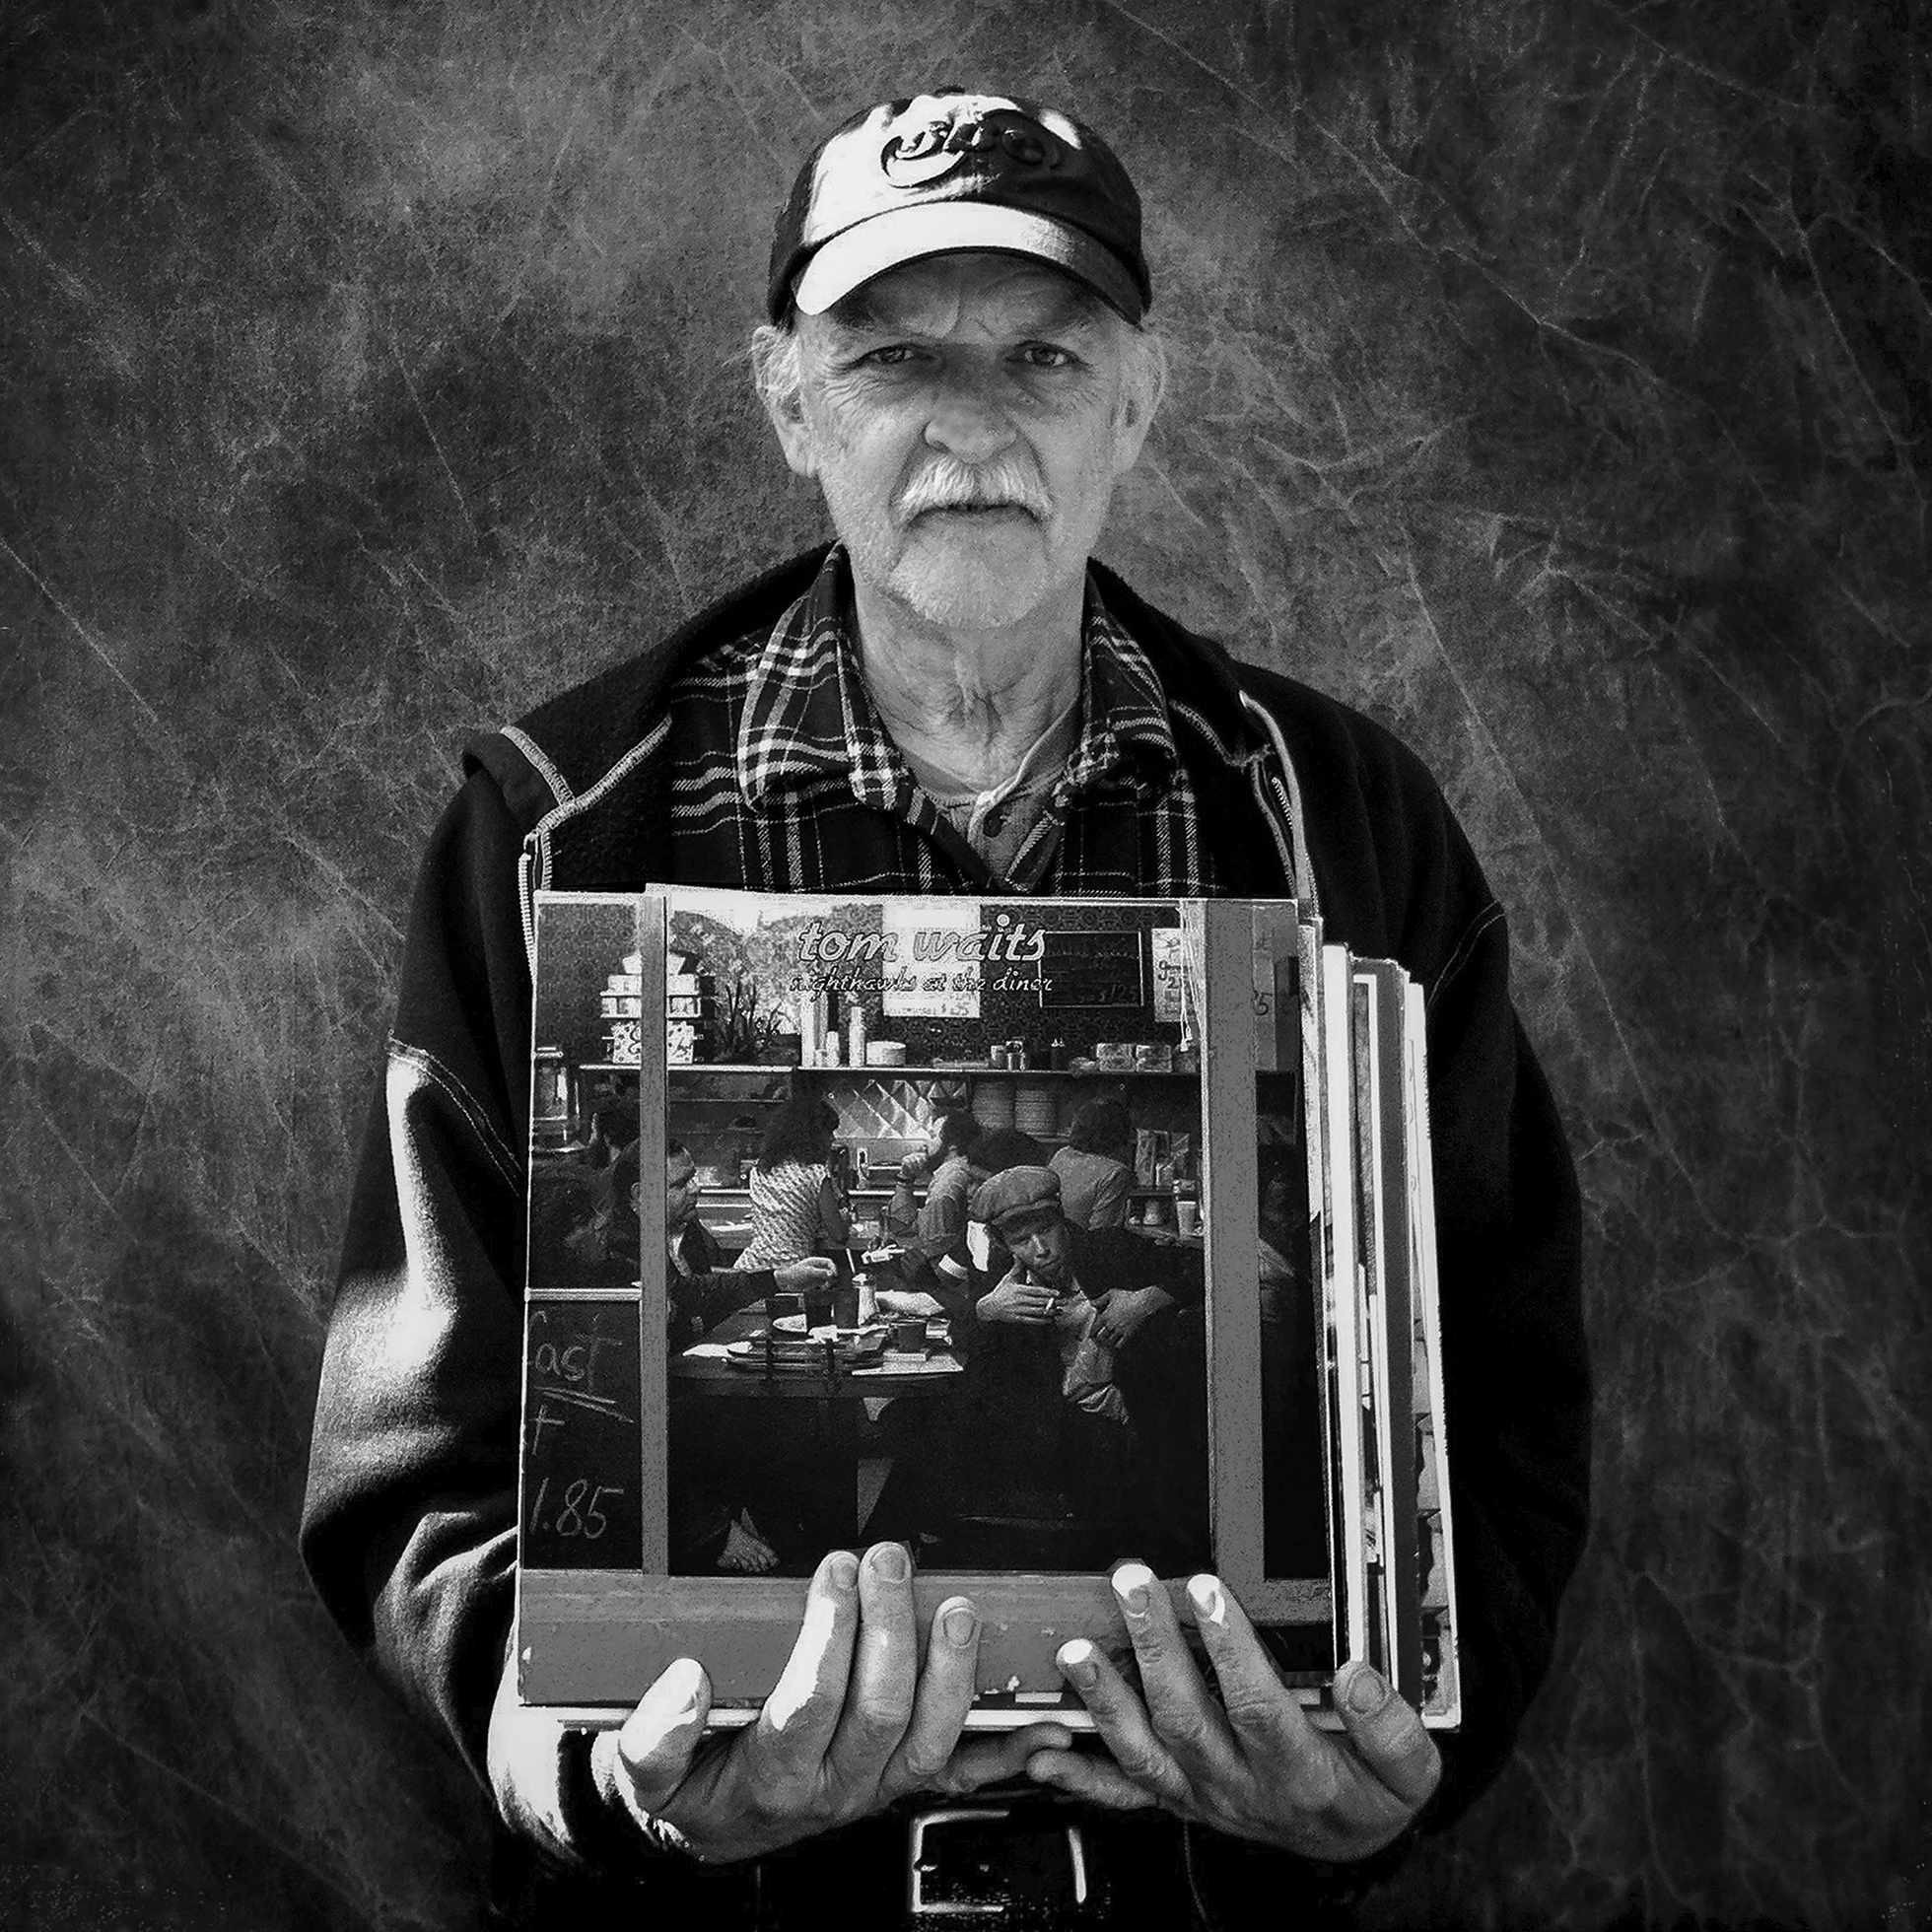 An older man in a cap and jacket holds a stack of albums against his chest presenting them to the camera. The album cover that is visible is Nighthawks at the Diner by Tom Waits.